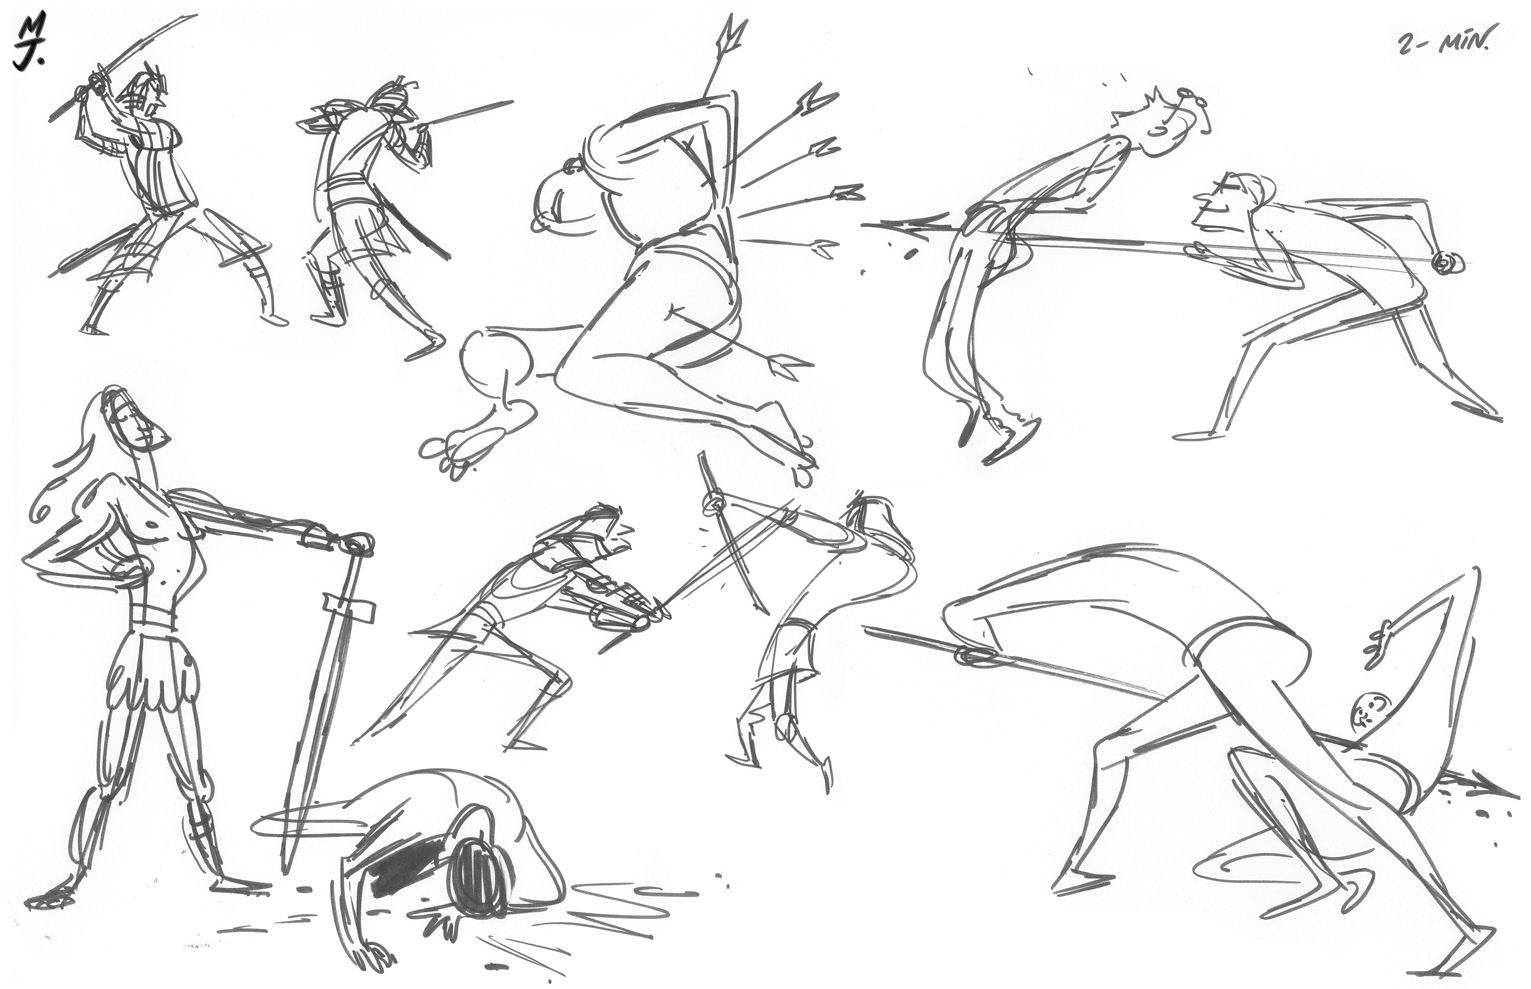 Quick Tip: Create Dynamic Poses Using Gesture Drawing | Envato Tuts+